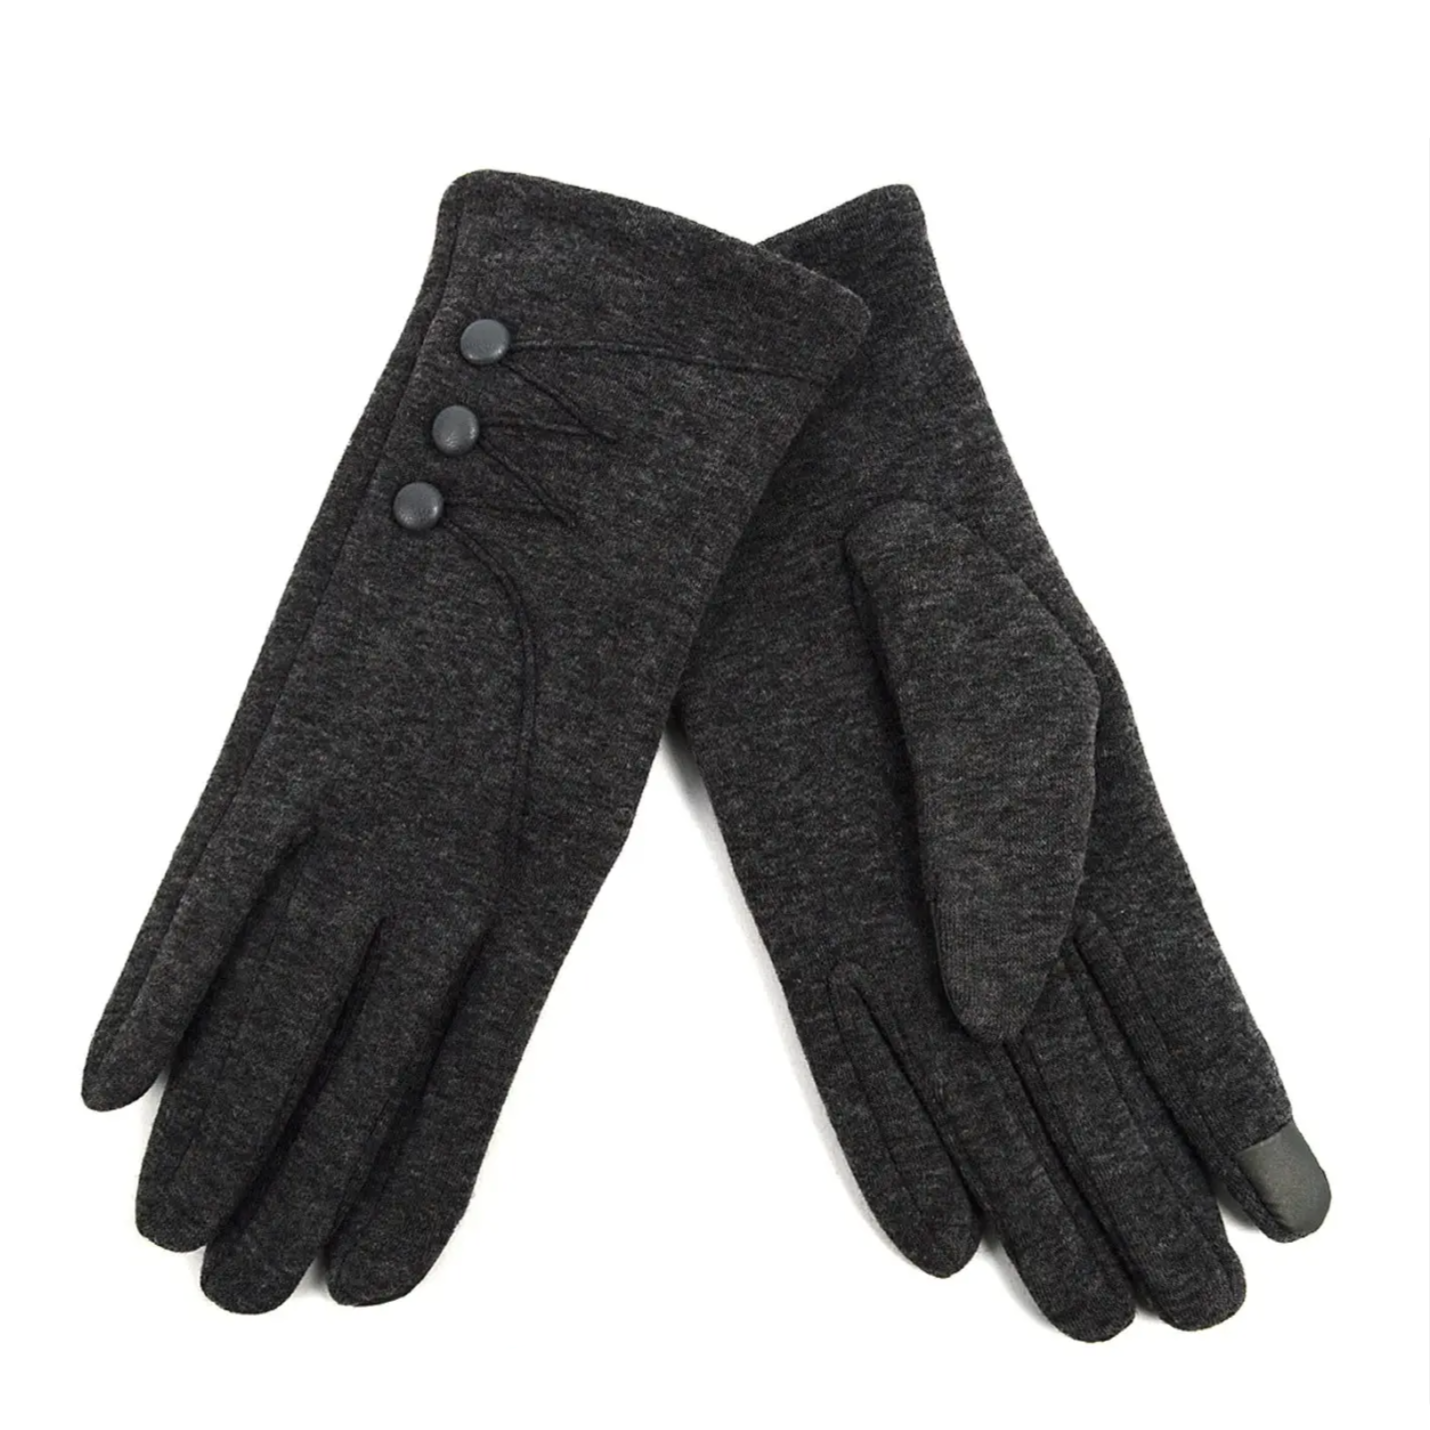 WOMEN'S STYLISH 3-BUTTON TOUCH SCREEN GLOVES